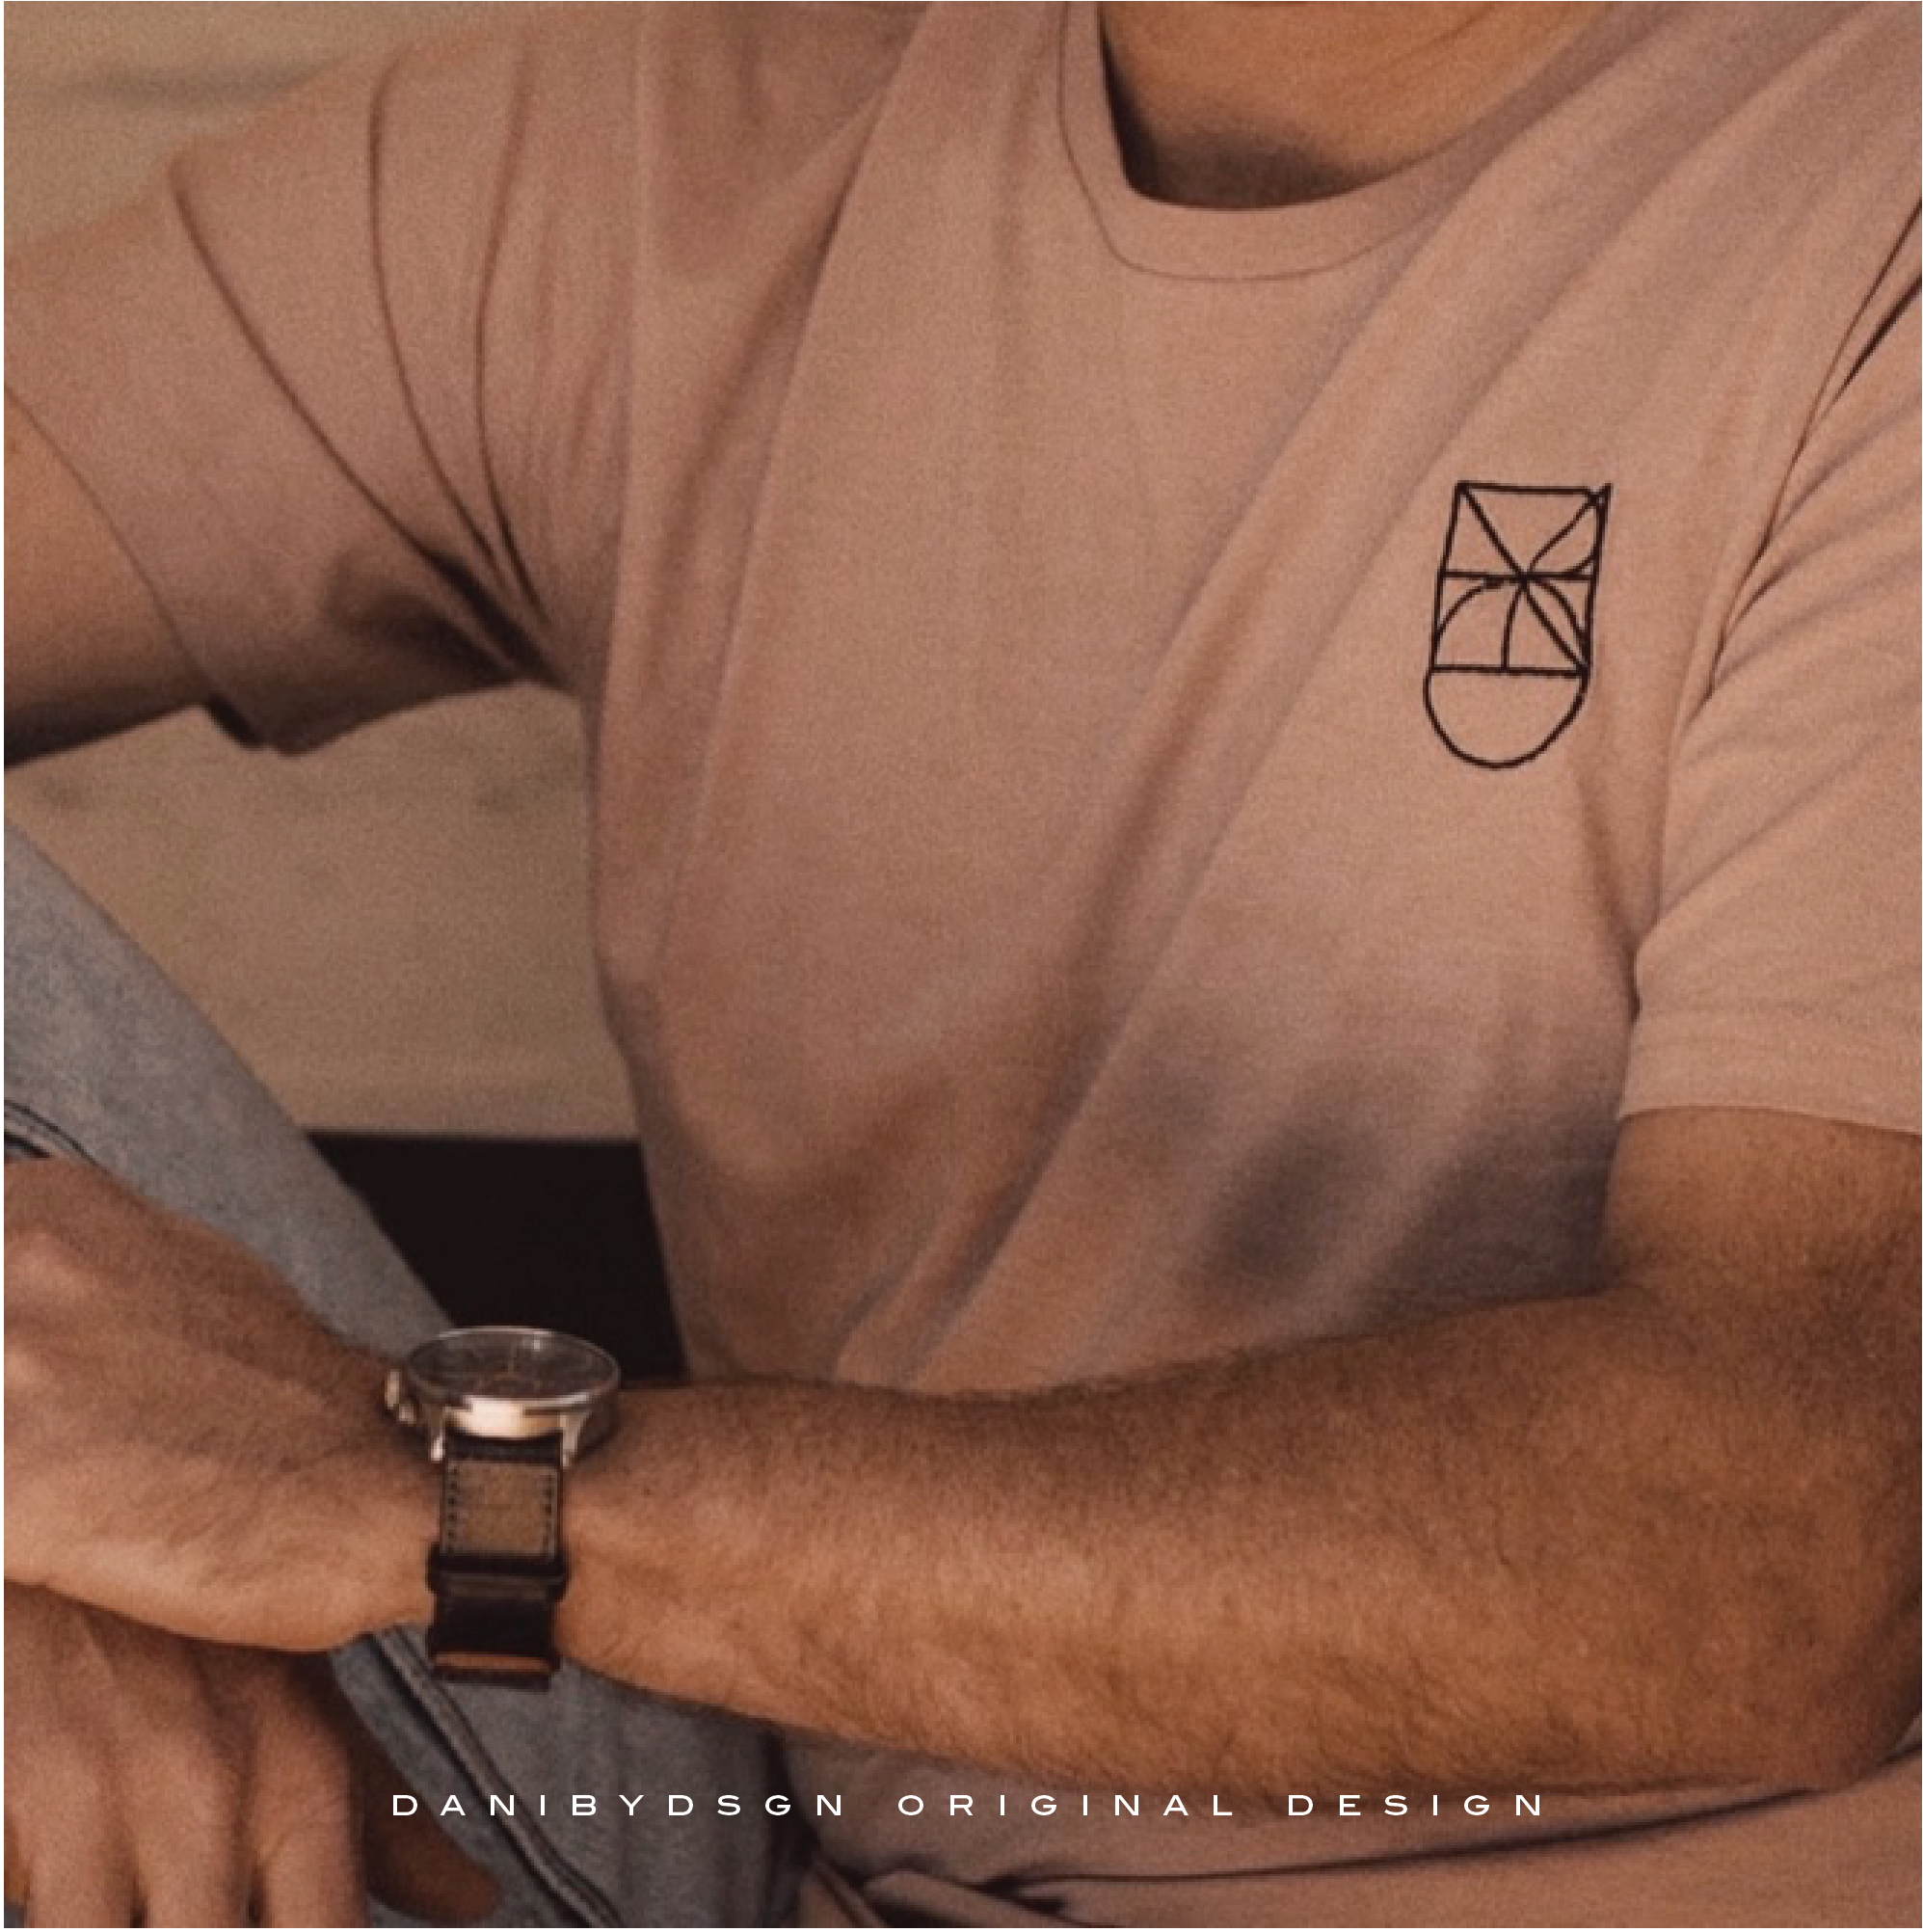 A sophisticated embroidered monogram design featuring personalized initials with fine line details and a minimalist approach on a beige round neck  shirt